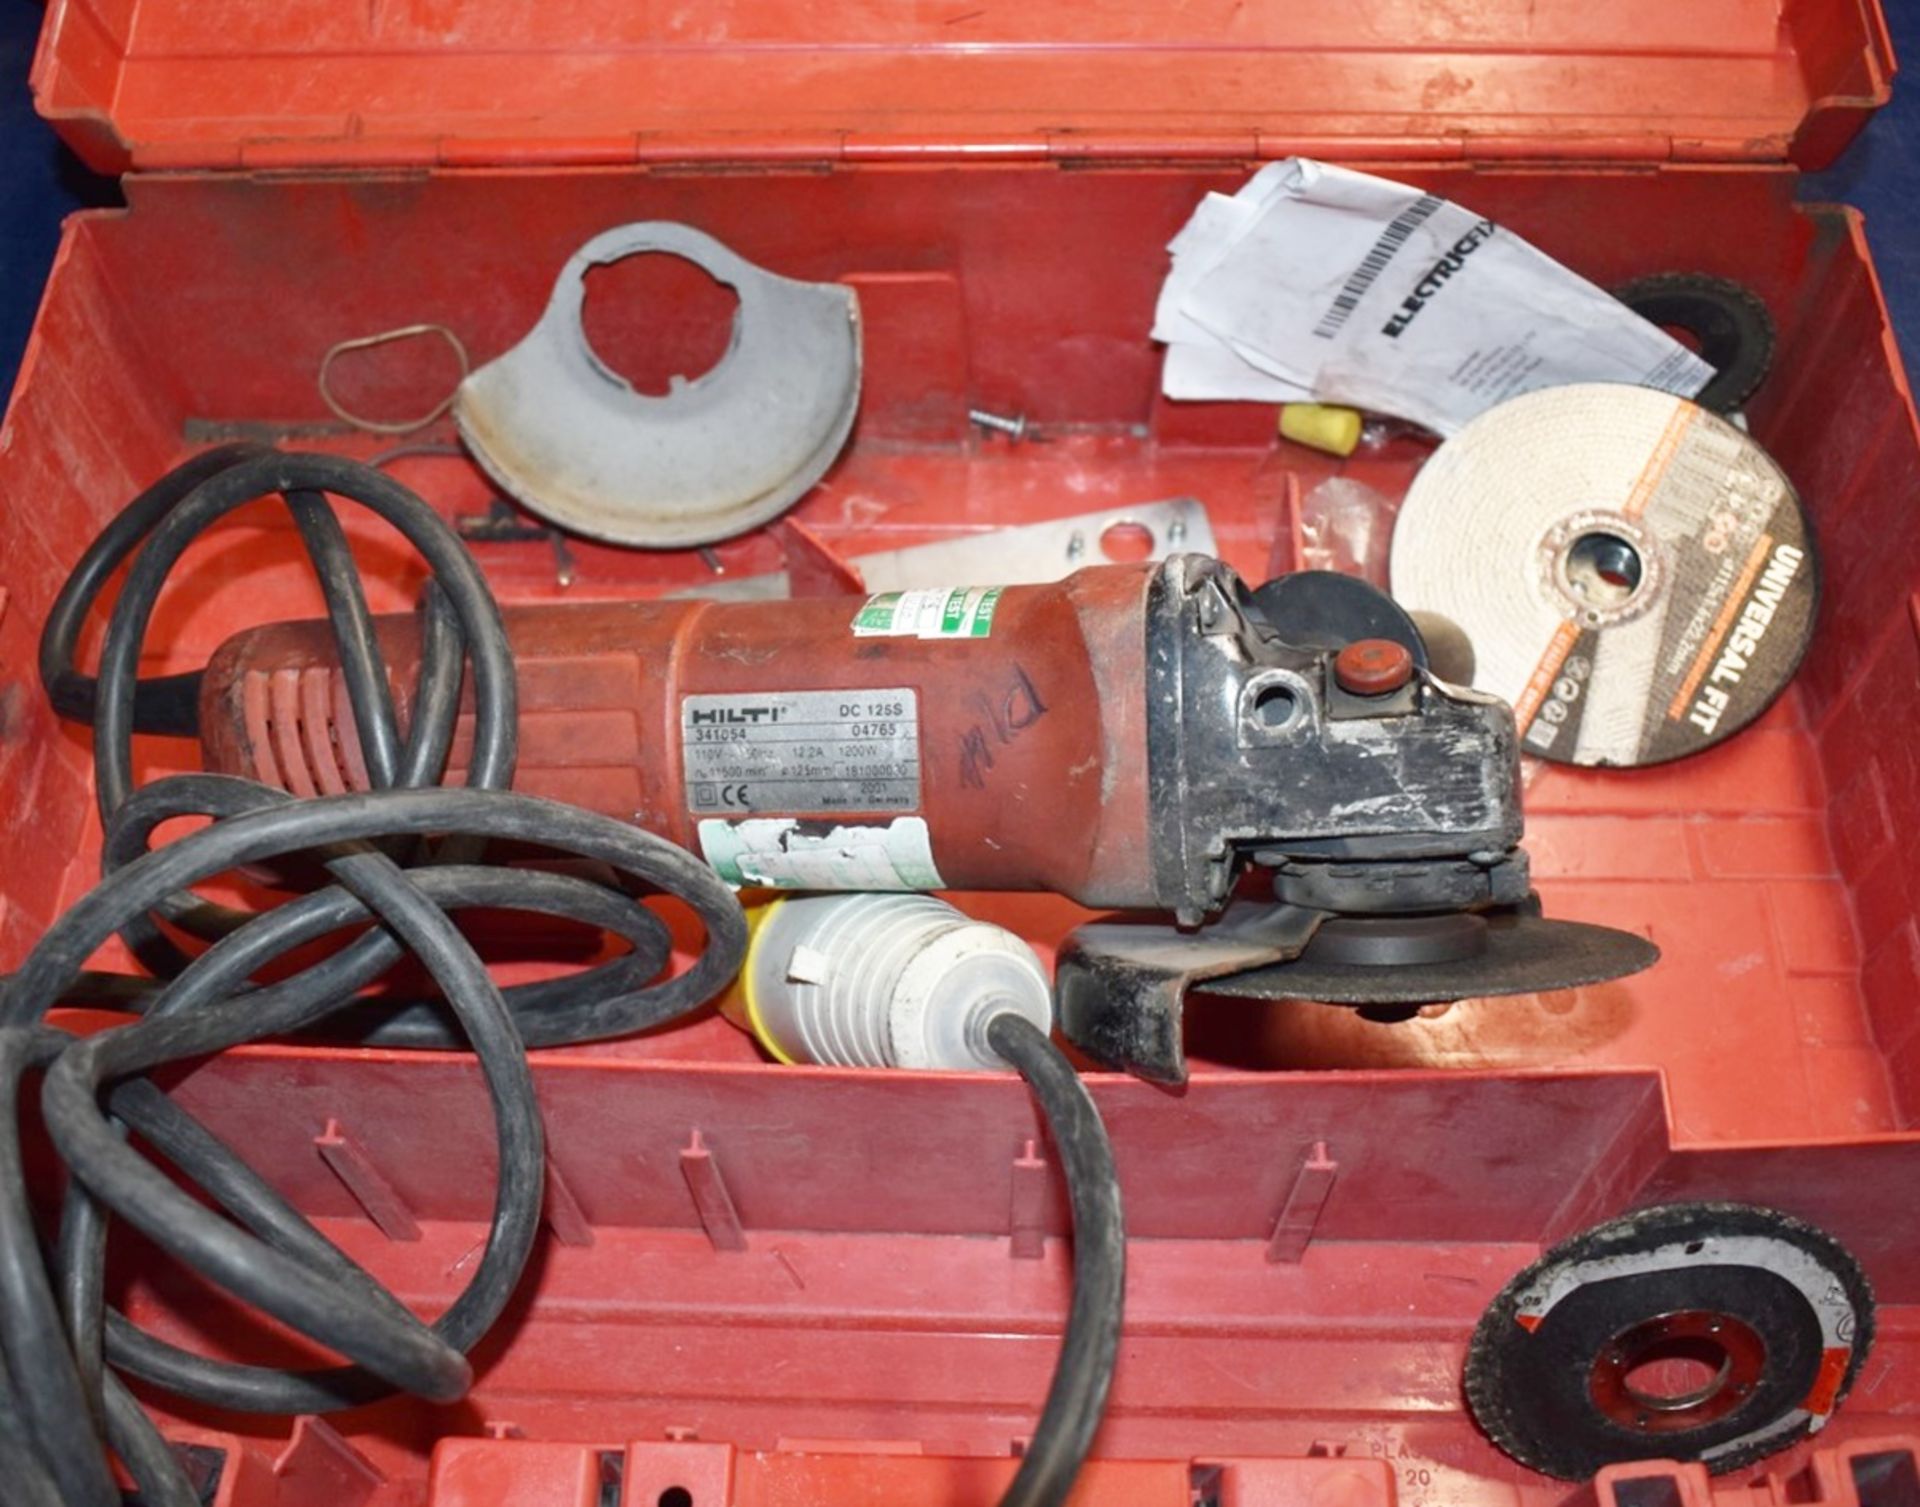 1 x Hilti DC 125S 110v Angle Grinder With Case PME128 - Image 3 of 6